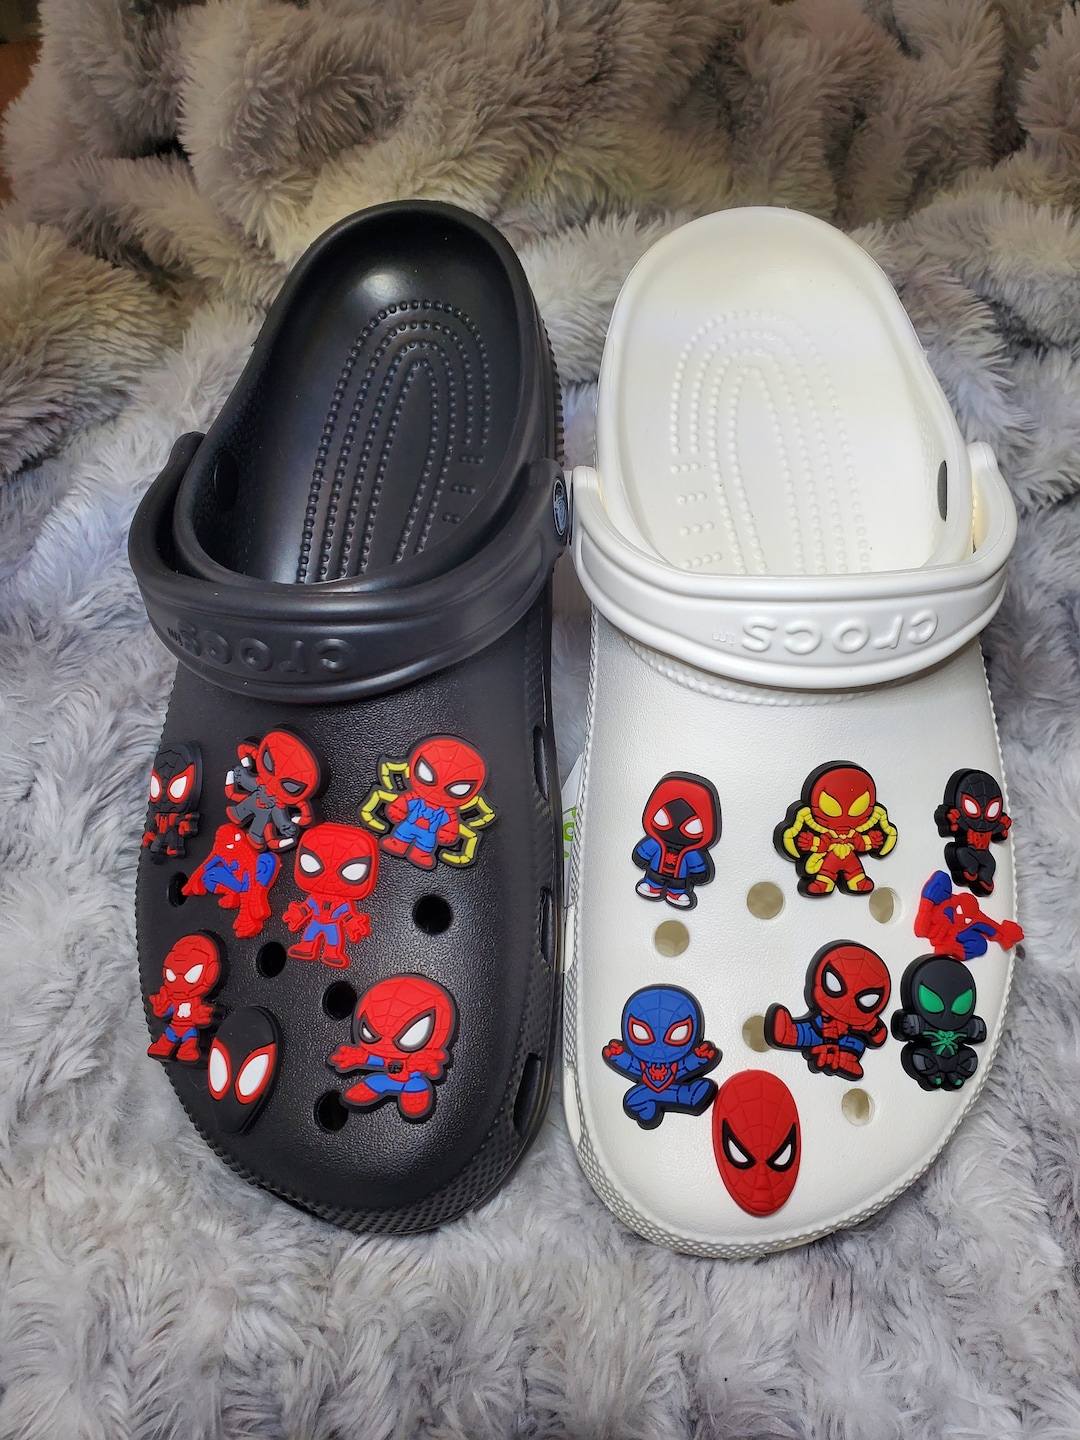 Hear me out: SOAP SHOES FOR SPIDER-MAN : r/Spiderman